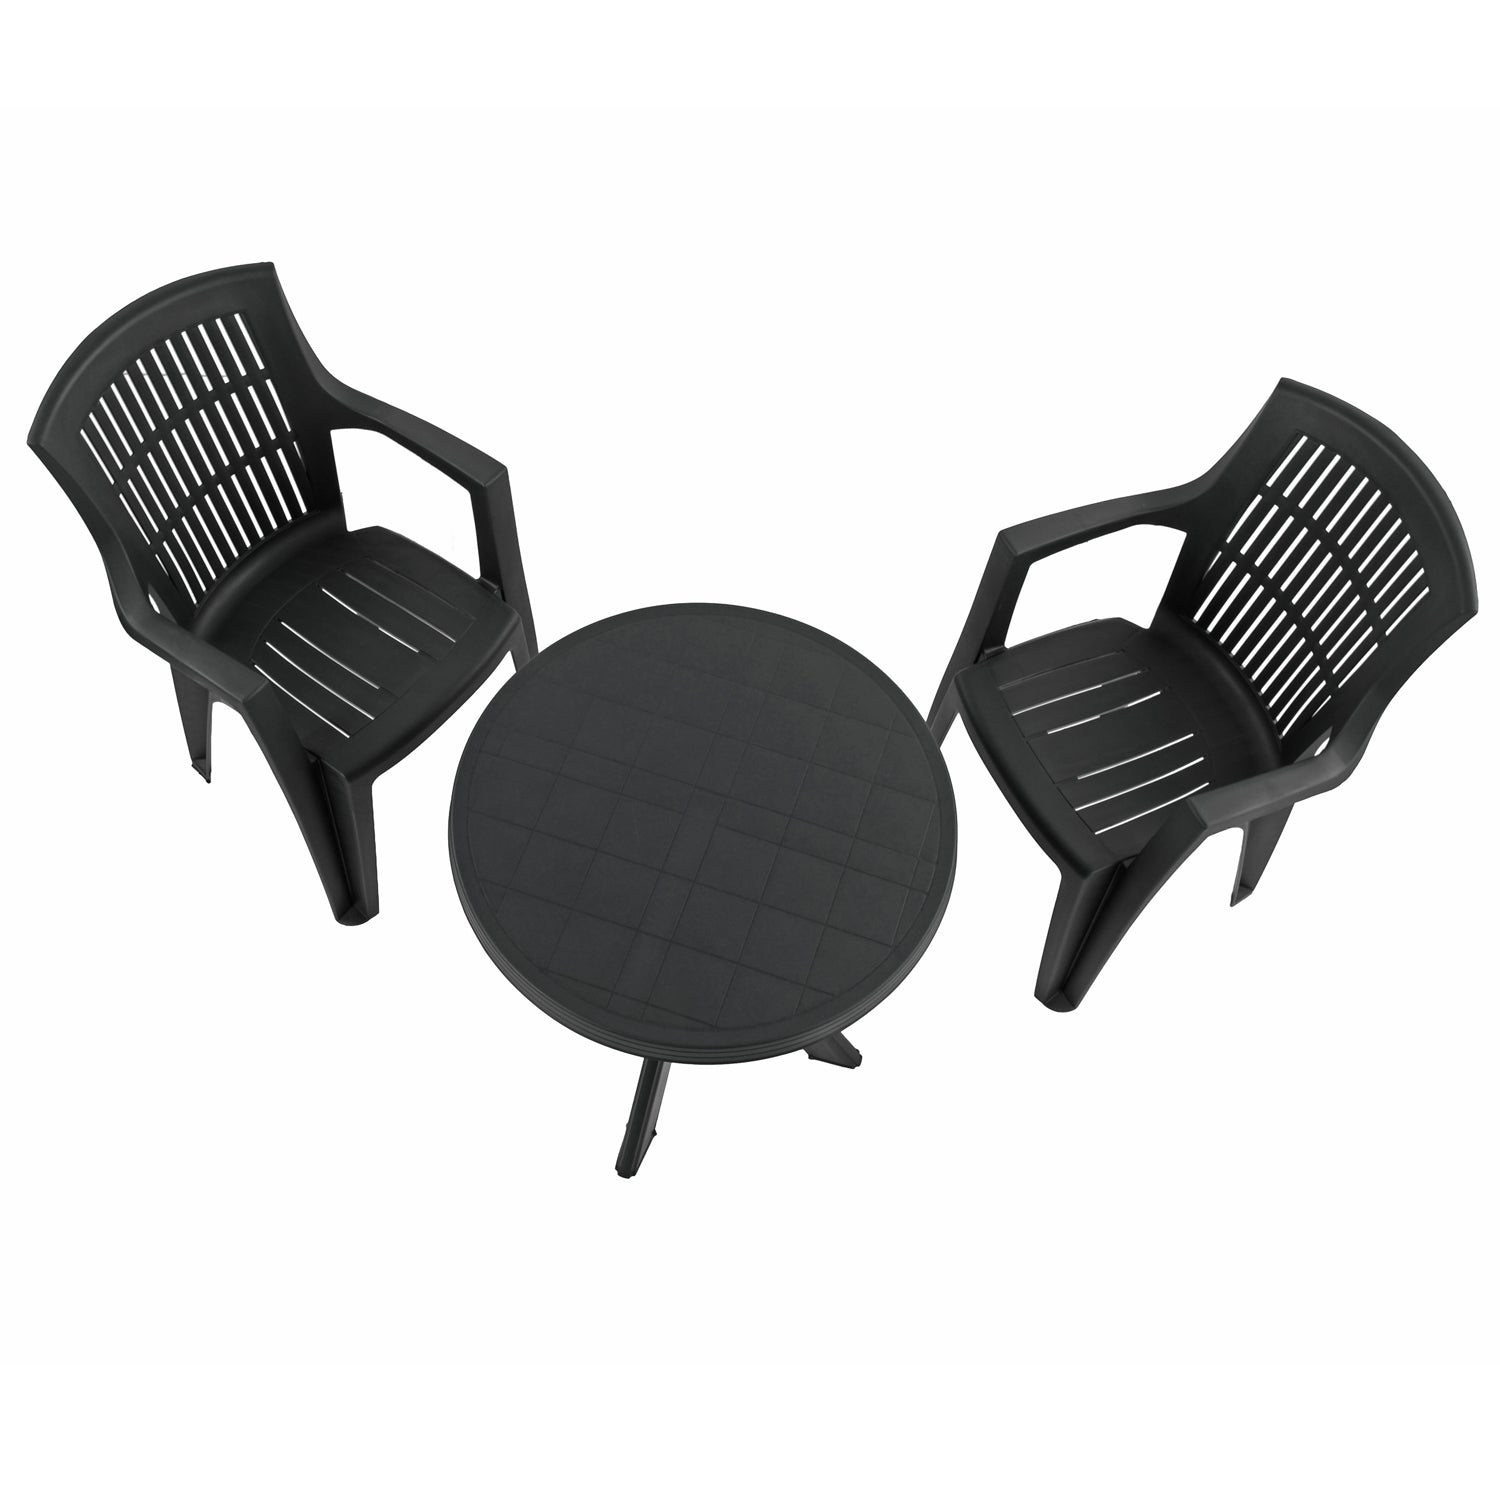 Trabella Tivoli Table with 2 Parma Chairs Garden Set Anthracite Dining Sets Trabella   